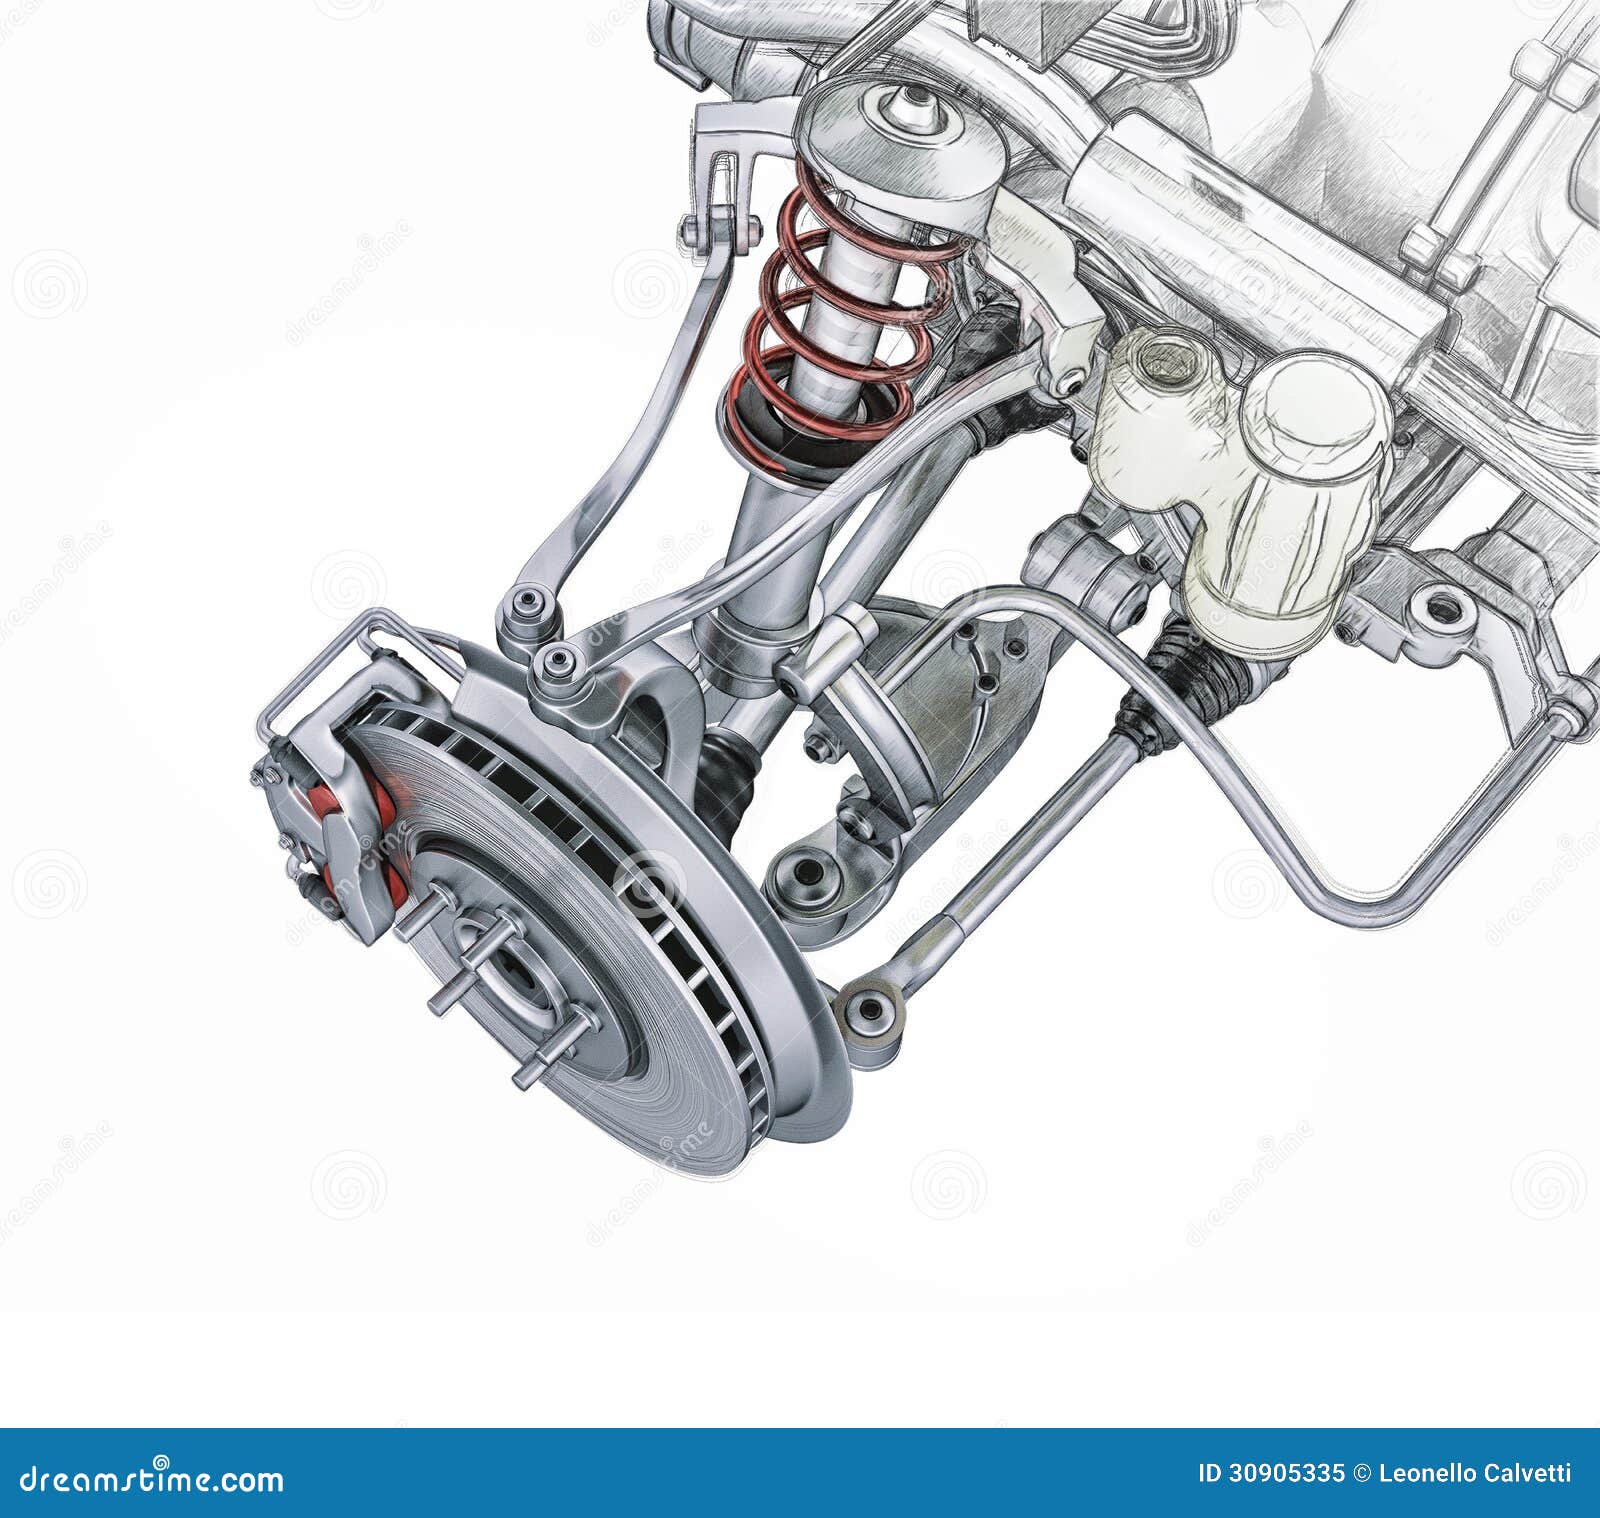 Multi Link Front Car Suspension, With Brake. Royalty Free Stock Photo